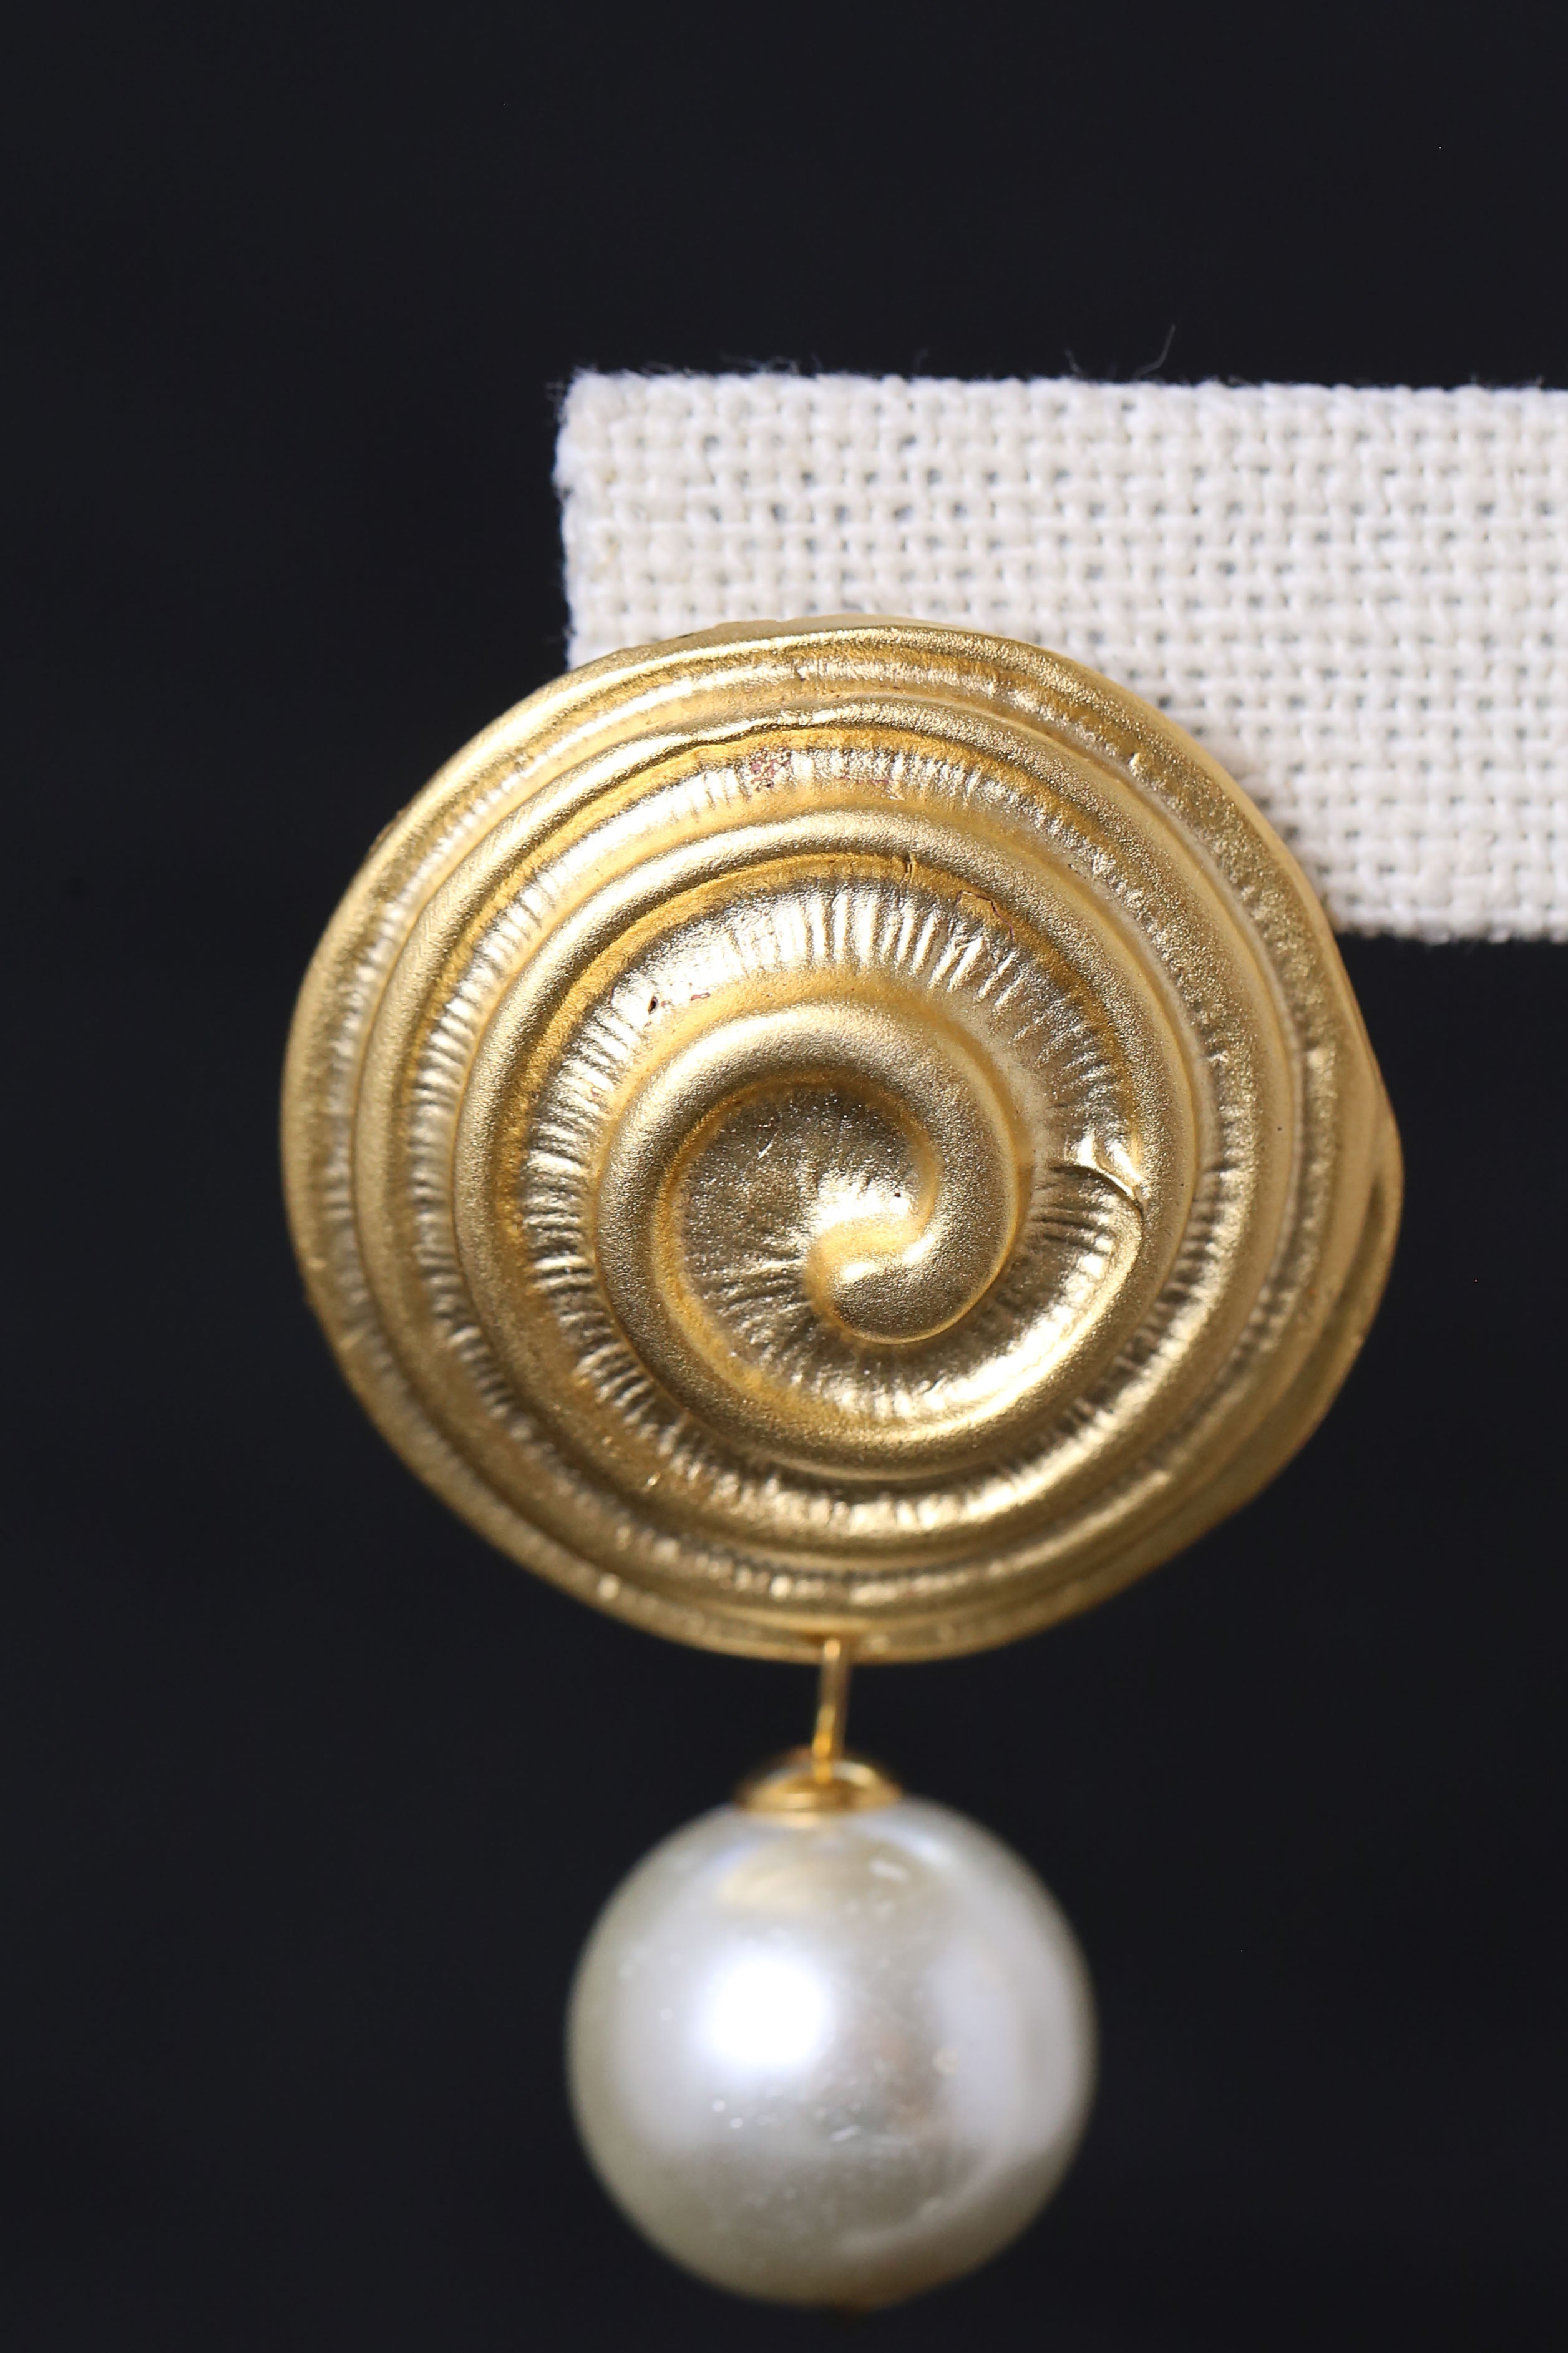 Fossil shape with Pearl Earring, Layer of Gold